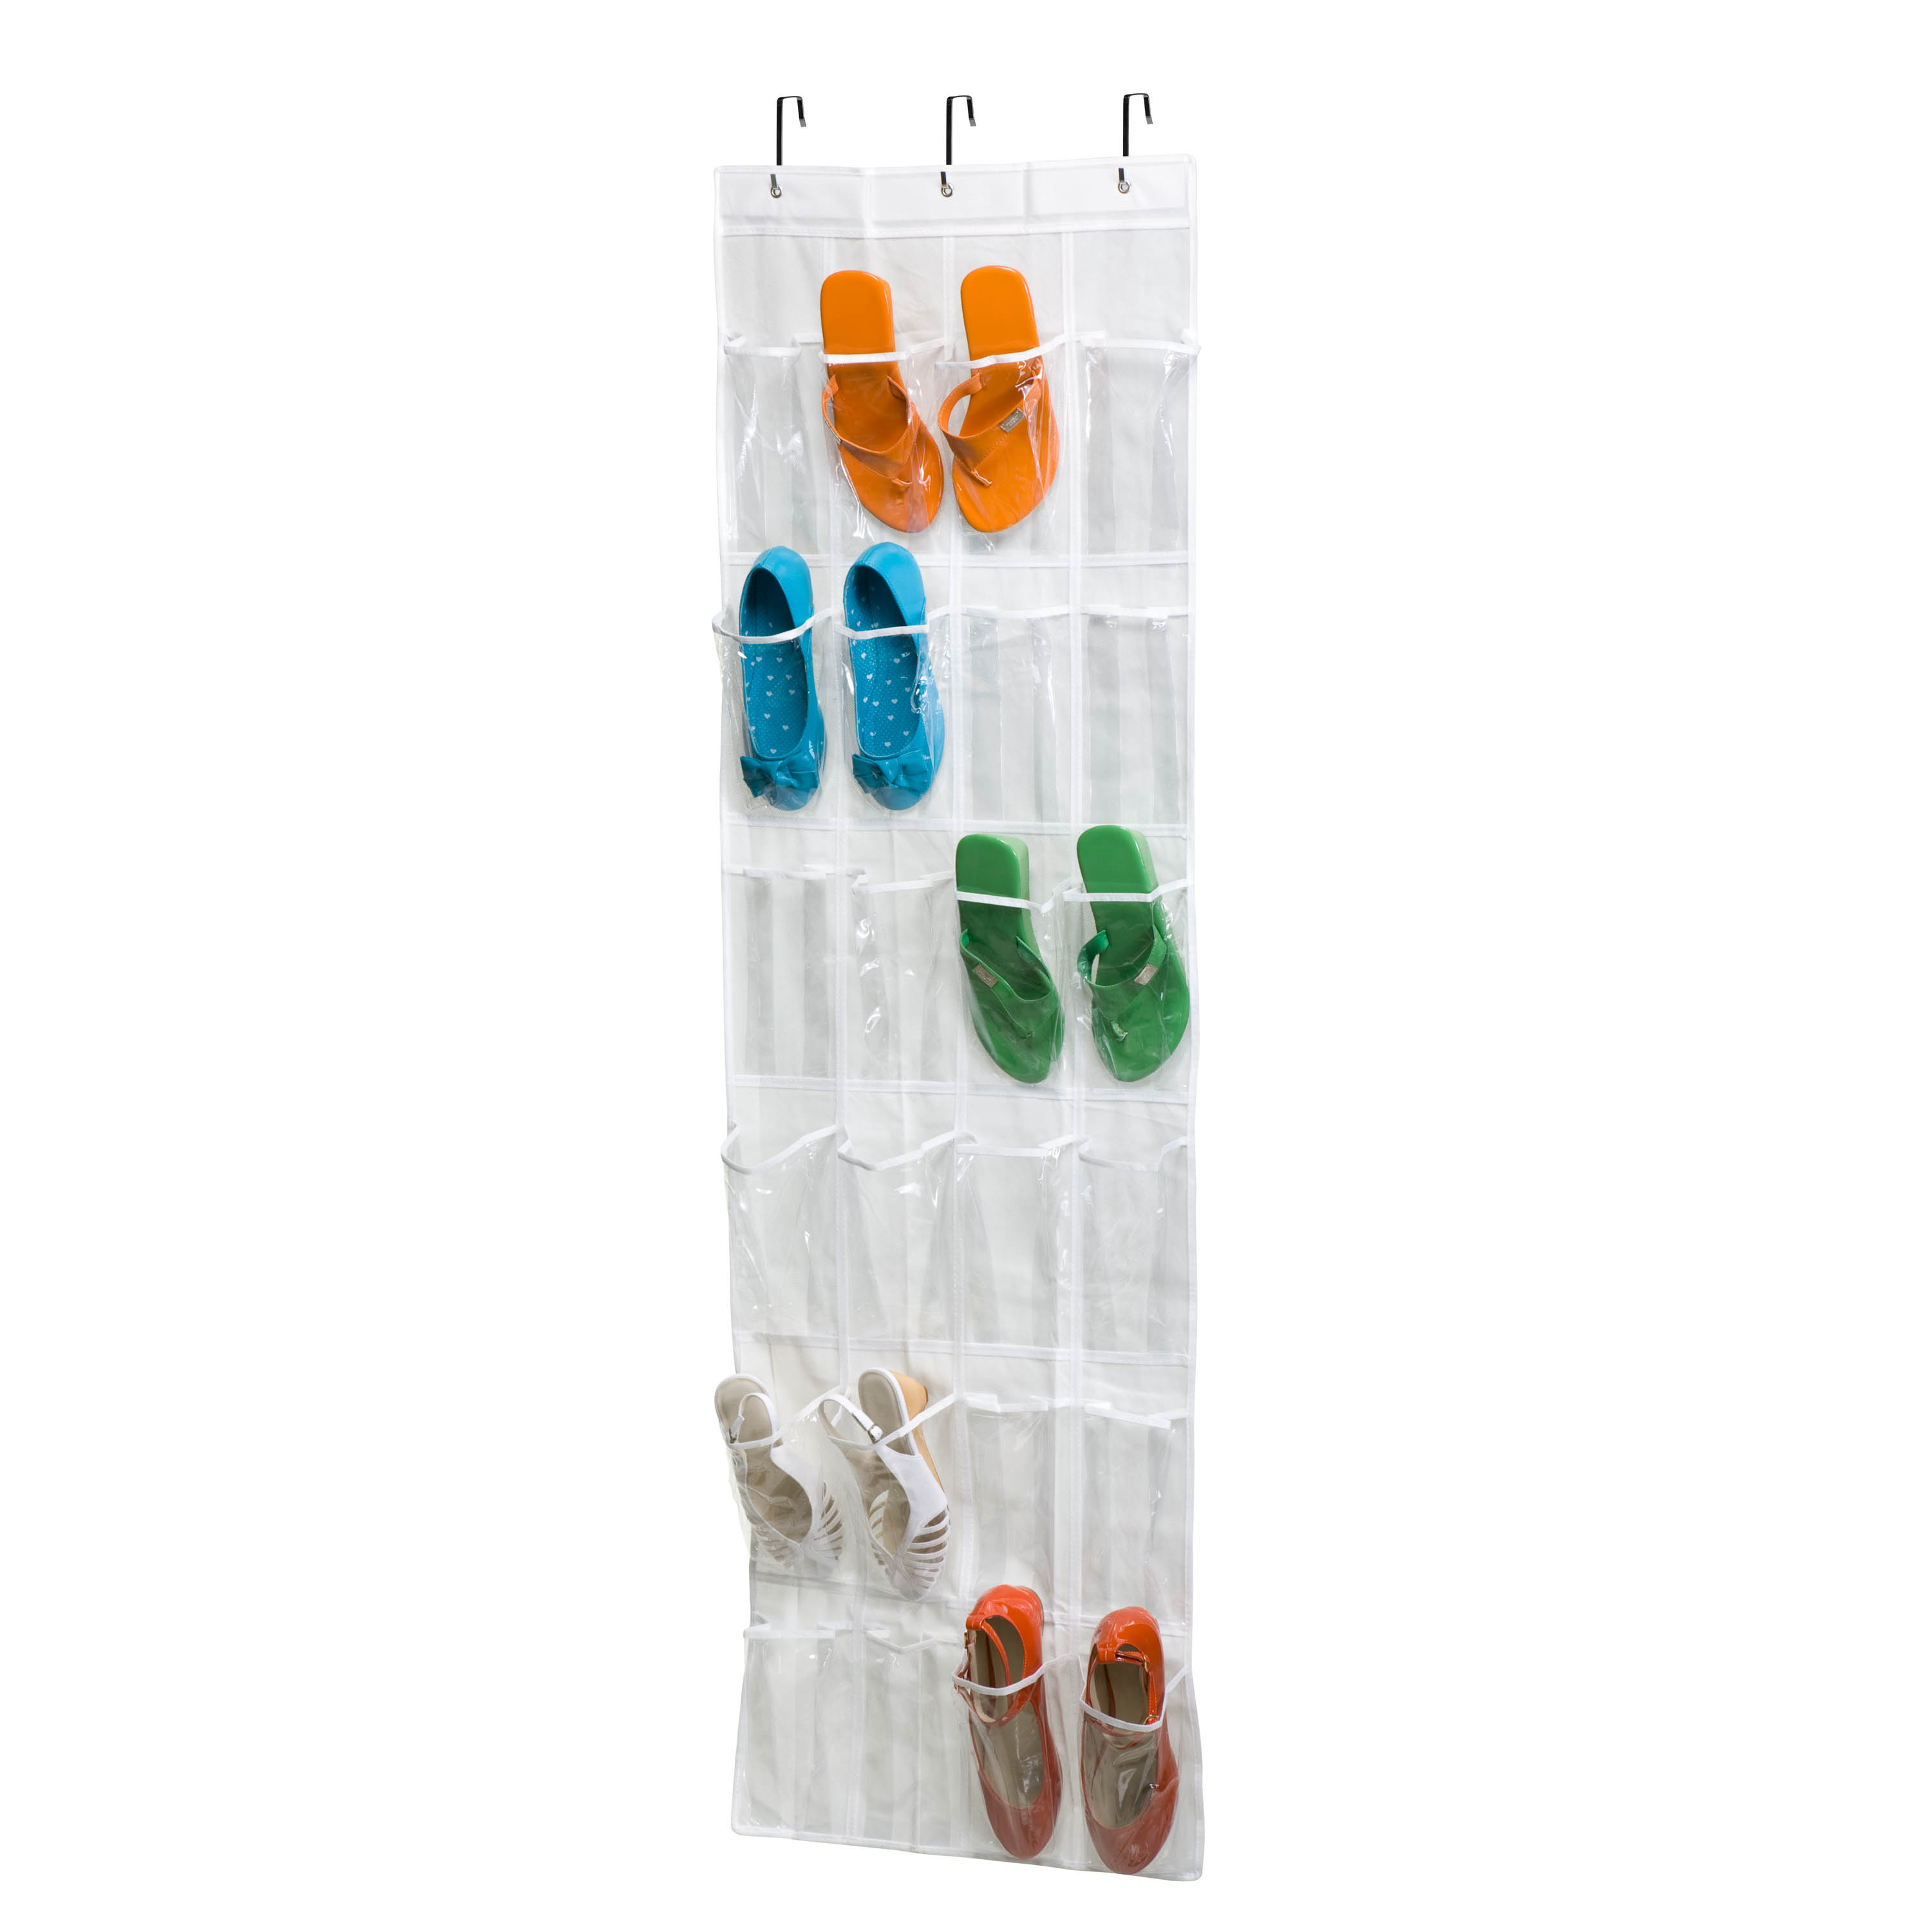 Honey-Can-Do PEVA 24-Pocket Over-the-Door Hanging Organizer, White/Clear - image 3 of 4